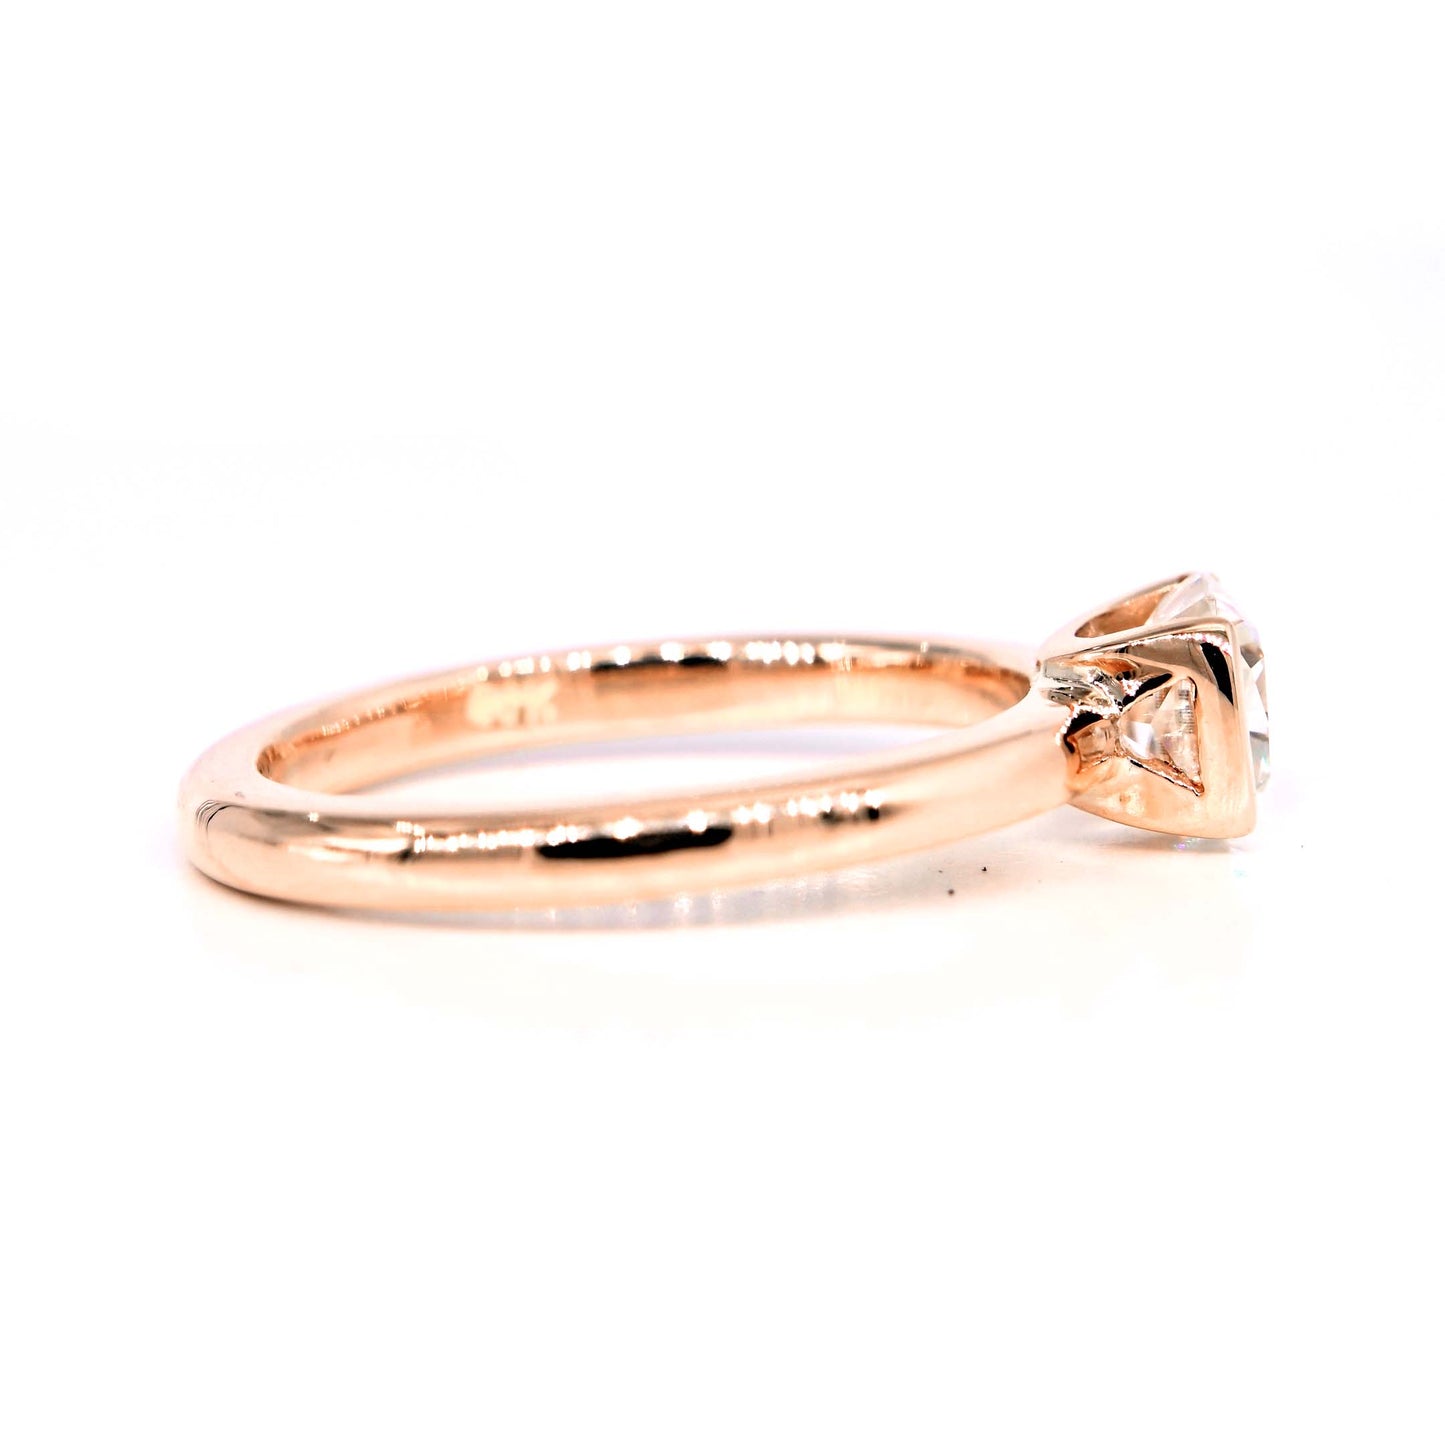 Rosegold engagement ring in Chiang Mai, Thailand